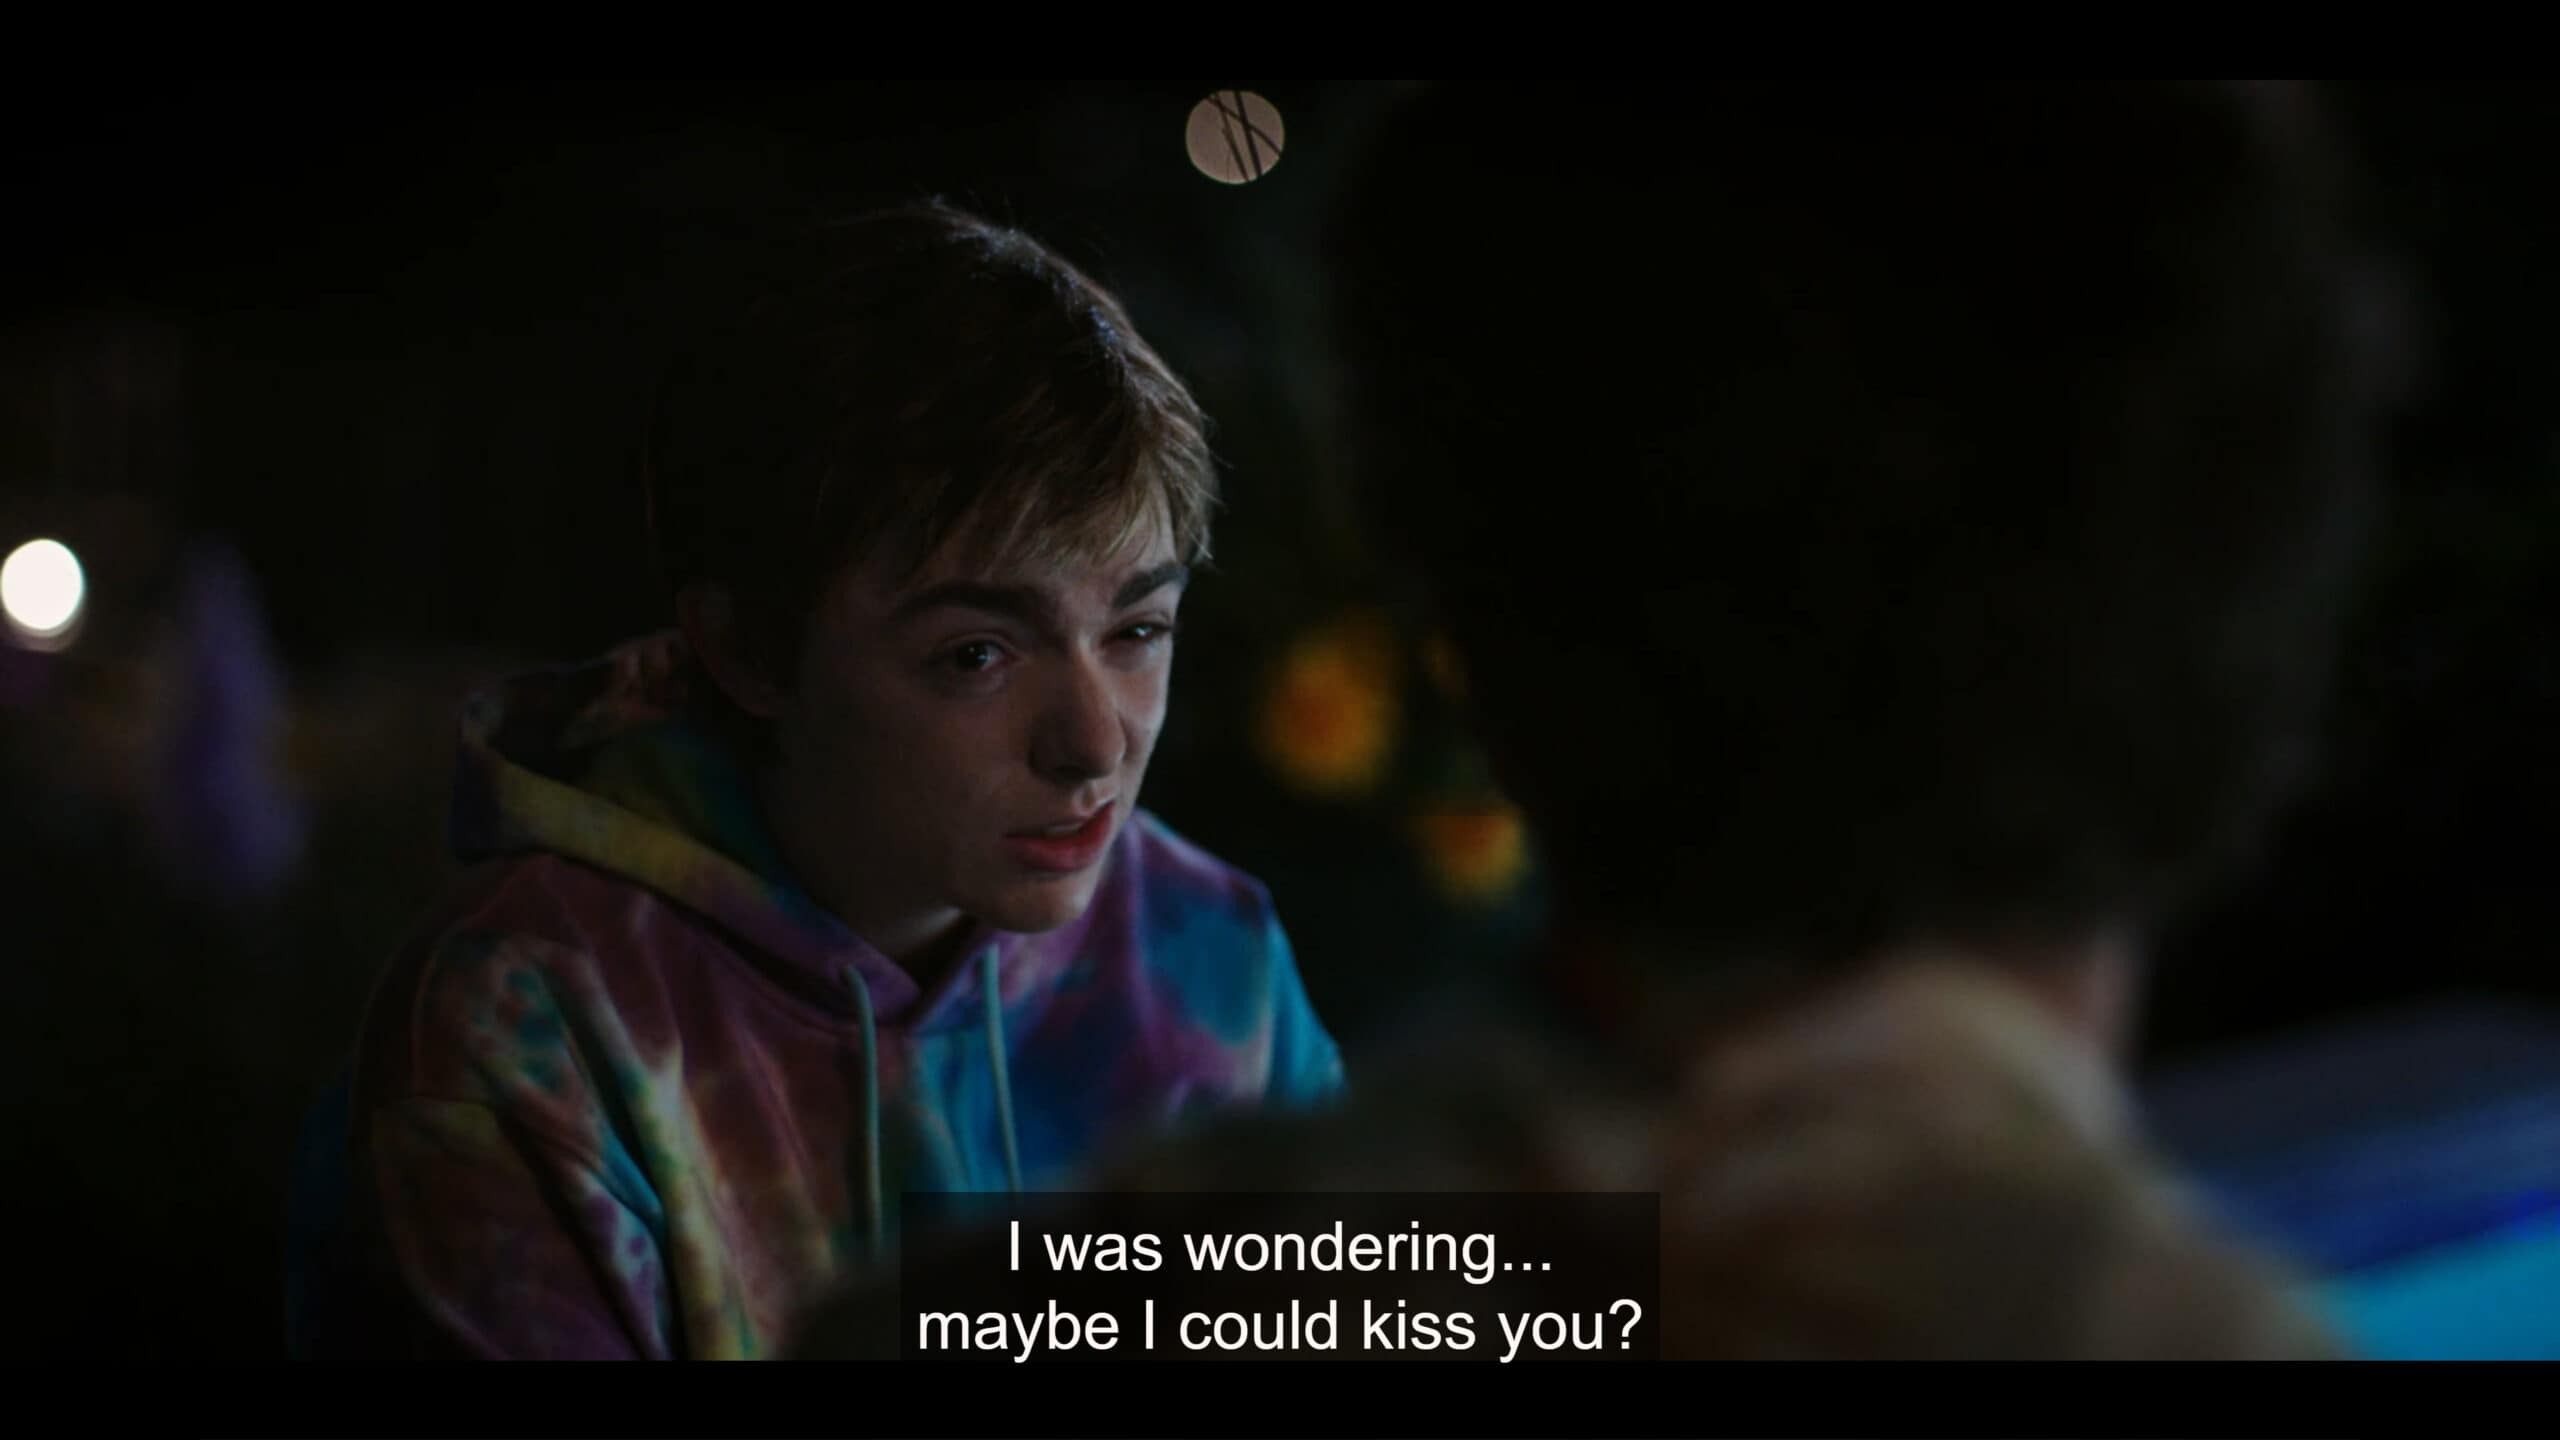 Skye (Elsie Fisher) asking Skye if they can kiss him